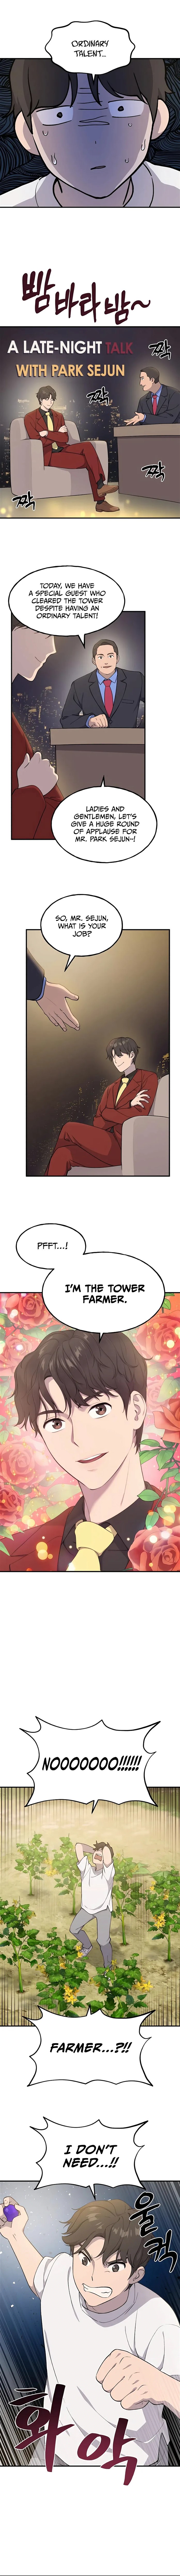 Solo Farming In The Tower Chapter 5 page 12